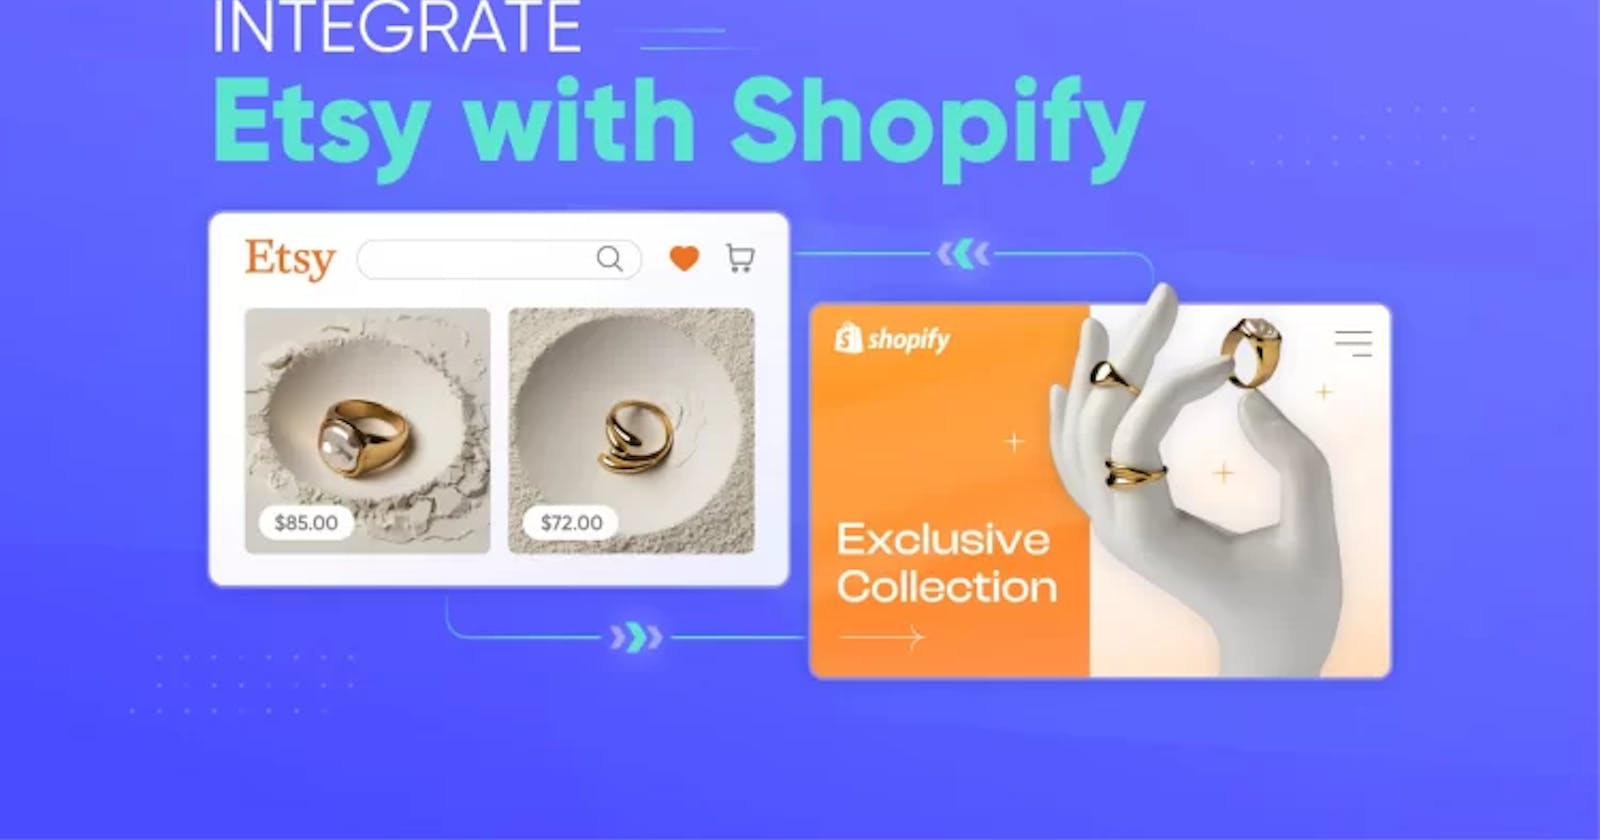 How to Use LitCommerce to Integrate Etsy with Shopify